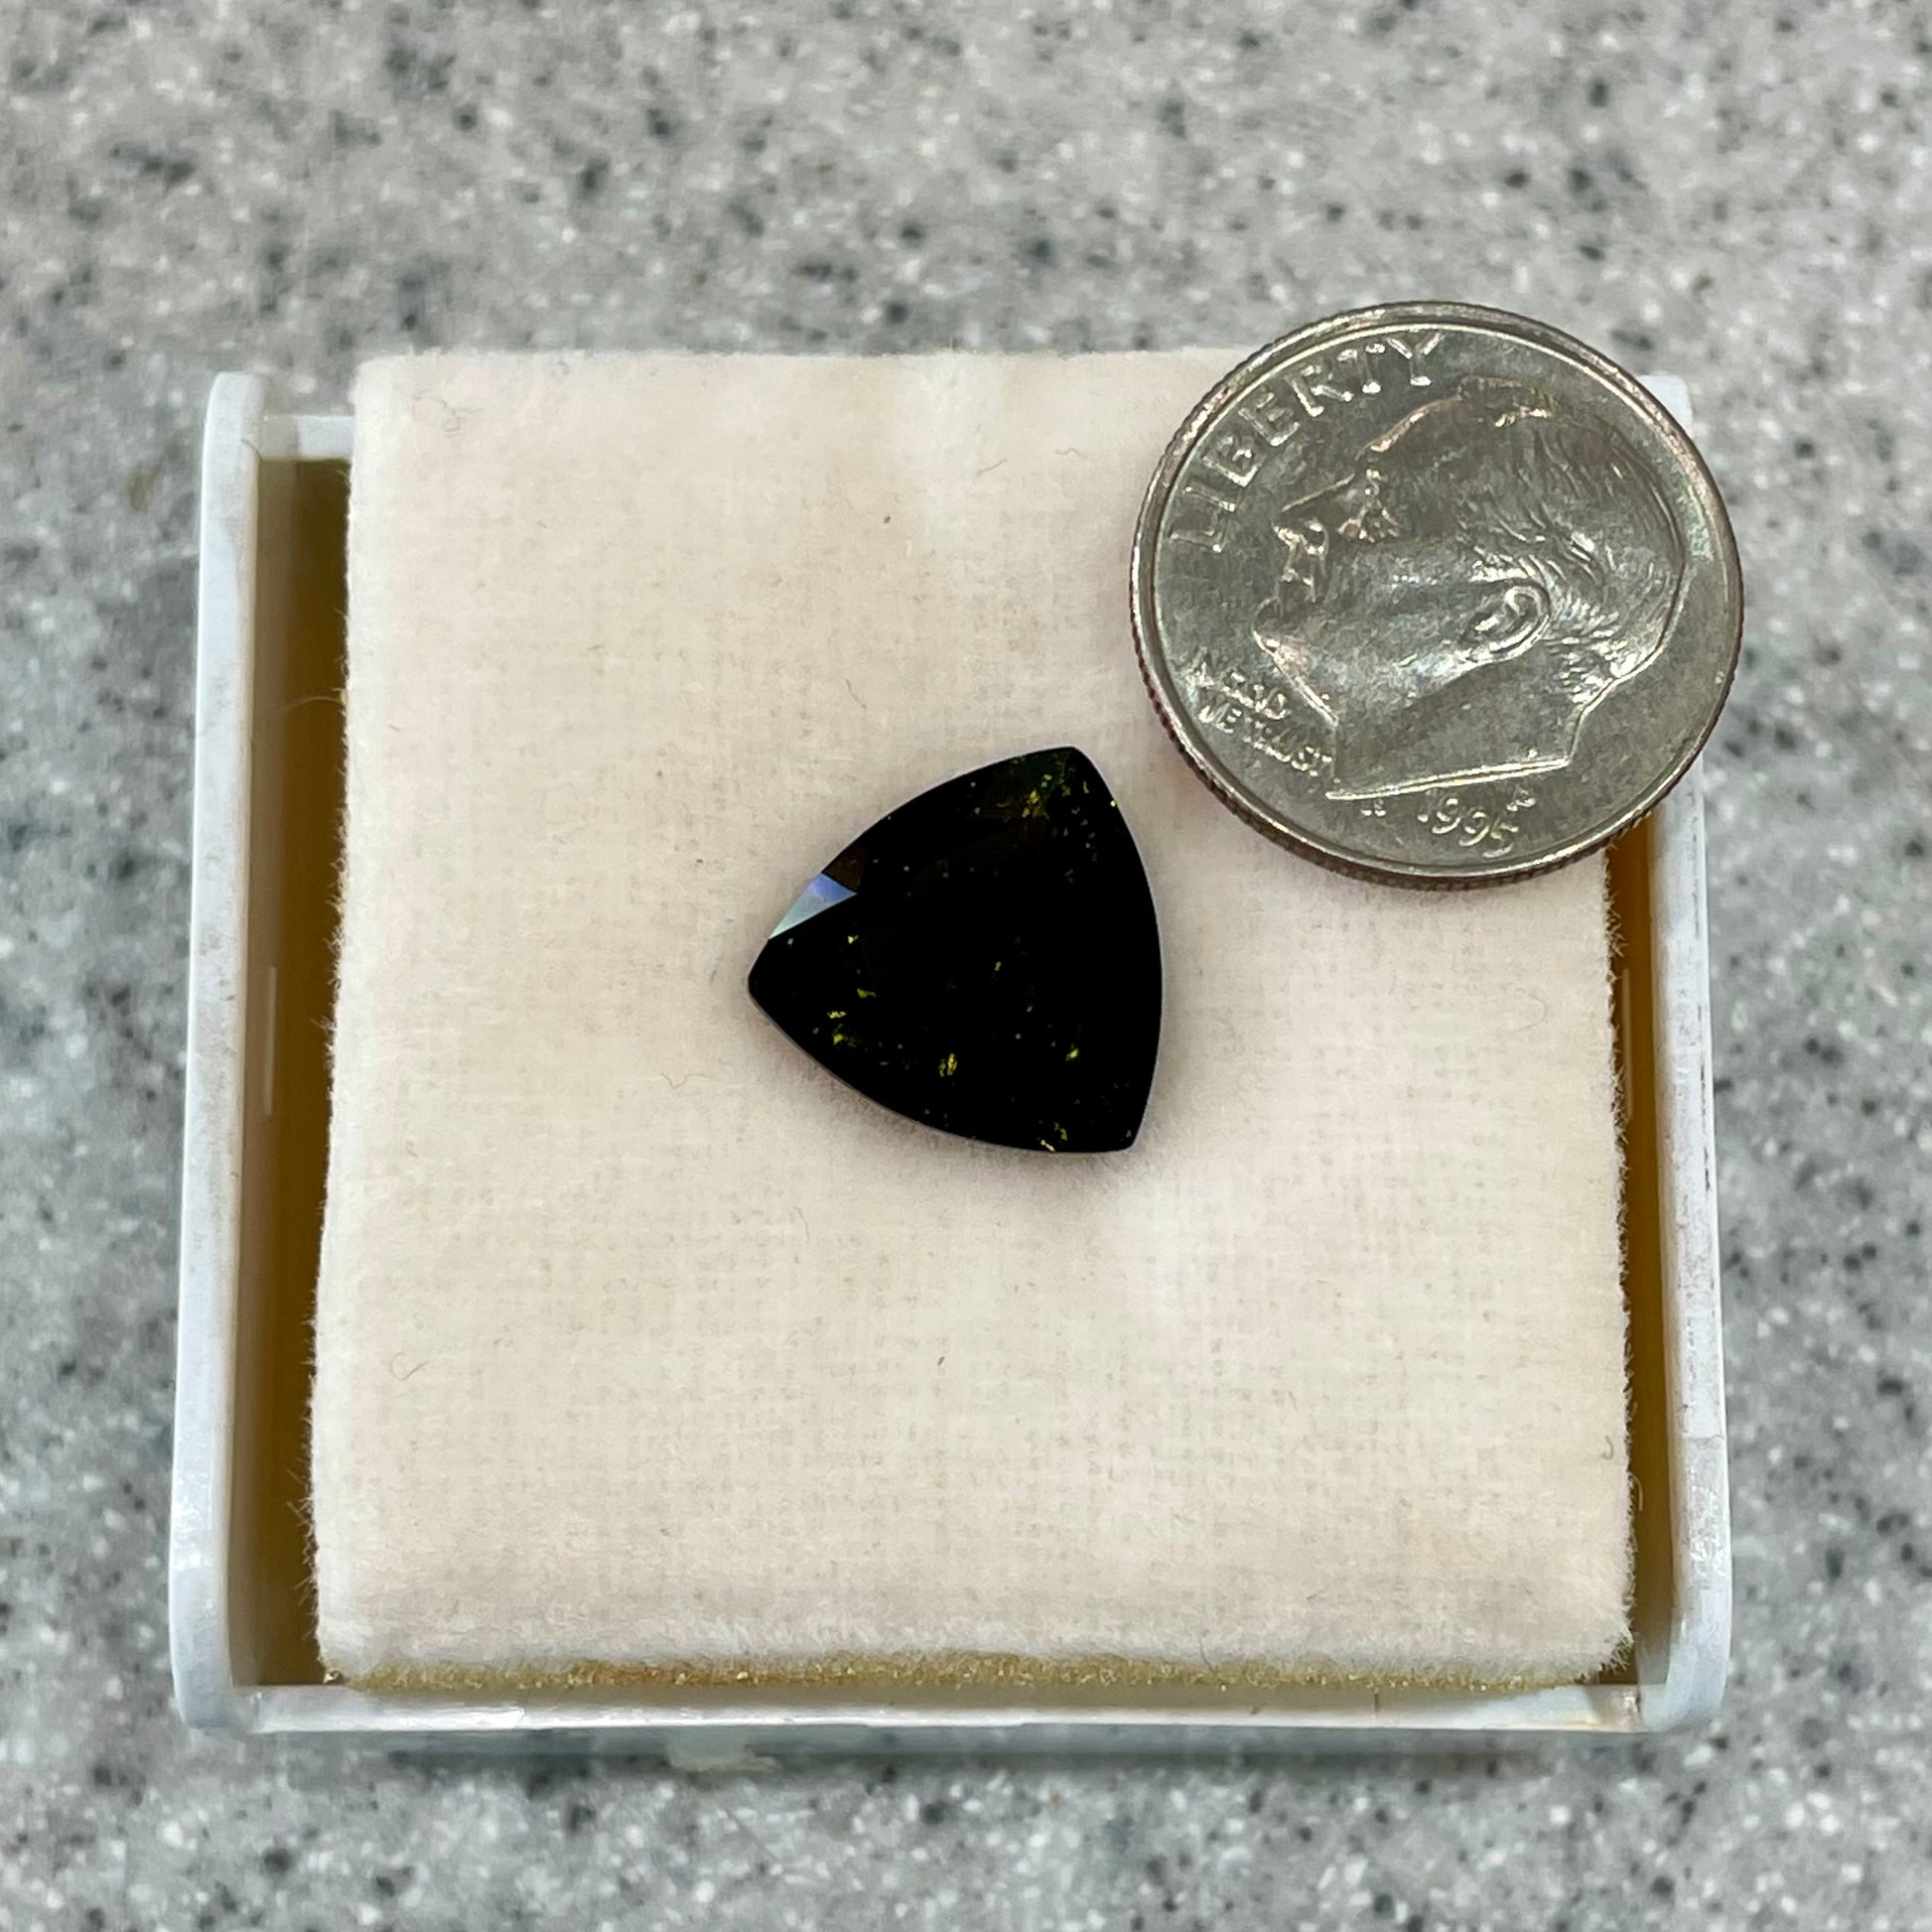 A faceted trillion cut moldavite gemstone that weighs 3.98 carats.  The stone is a dark green color.